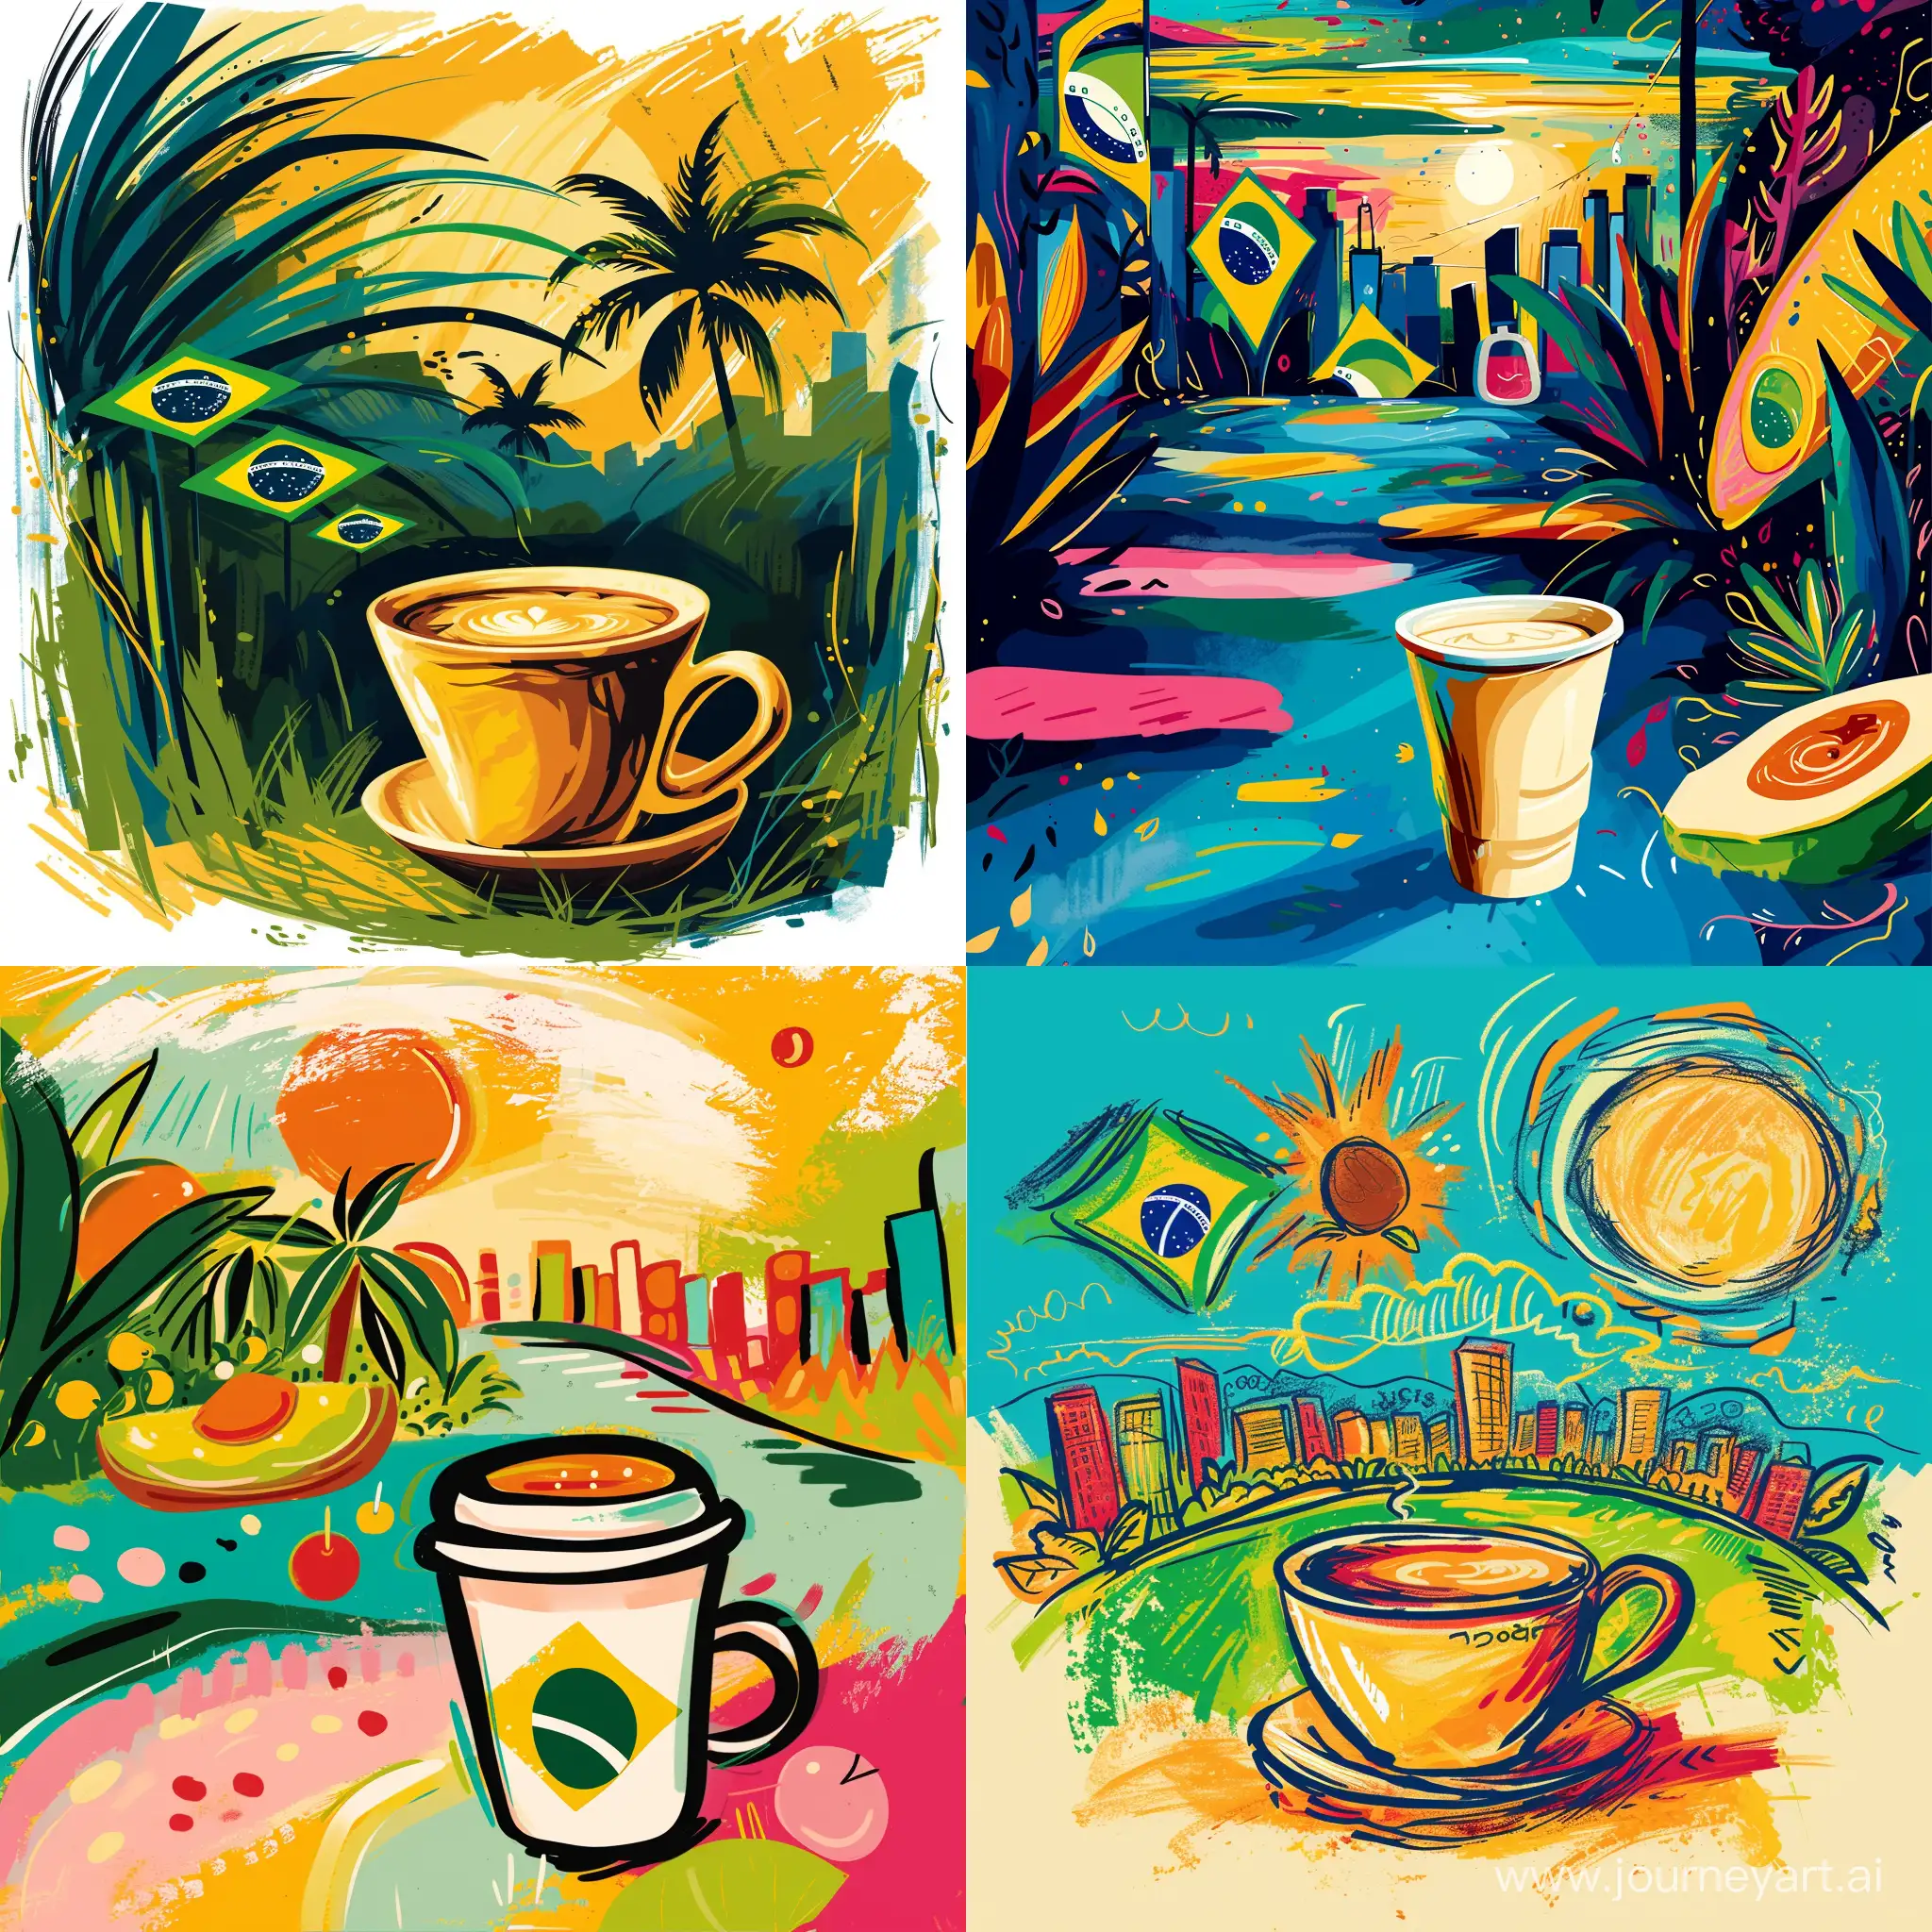 Vibrant-Brazilian-Symbols-and-Coffee-Cup-in-Abstract-Illustration